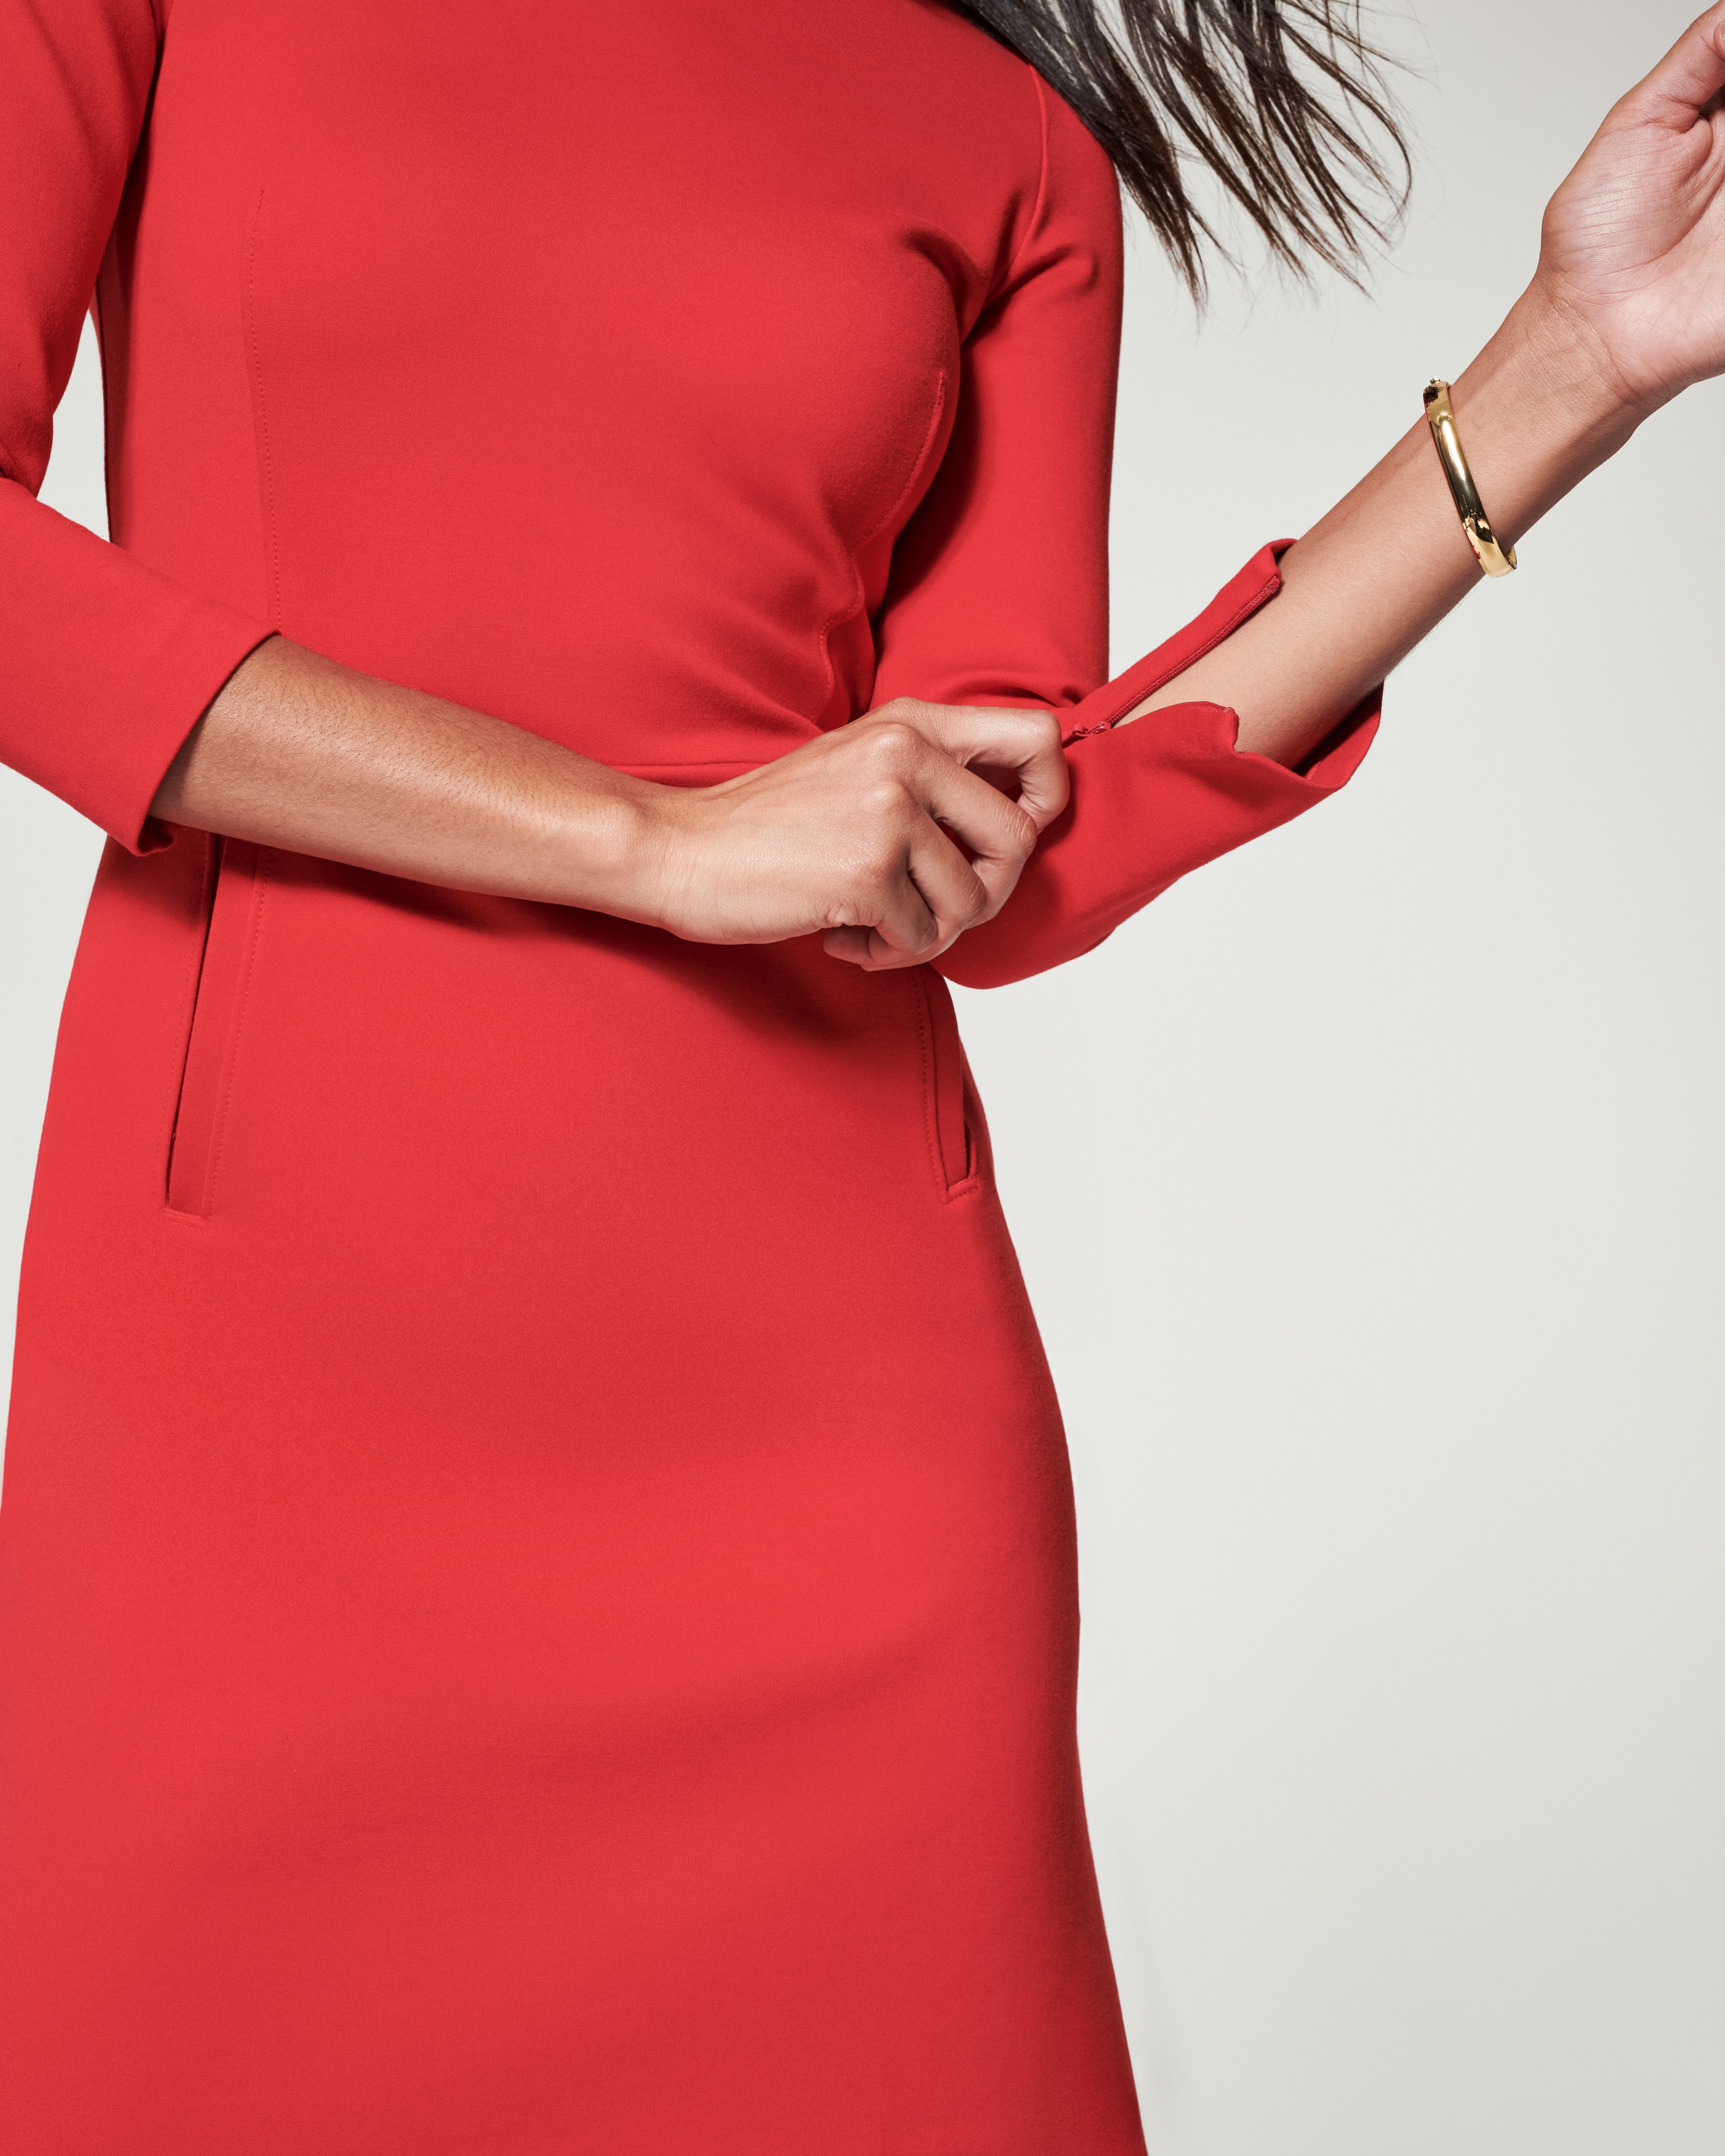 SPANX THE PERFECT FIT AND FLARE DRESS - Monkee's of